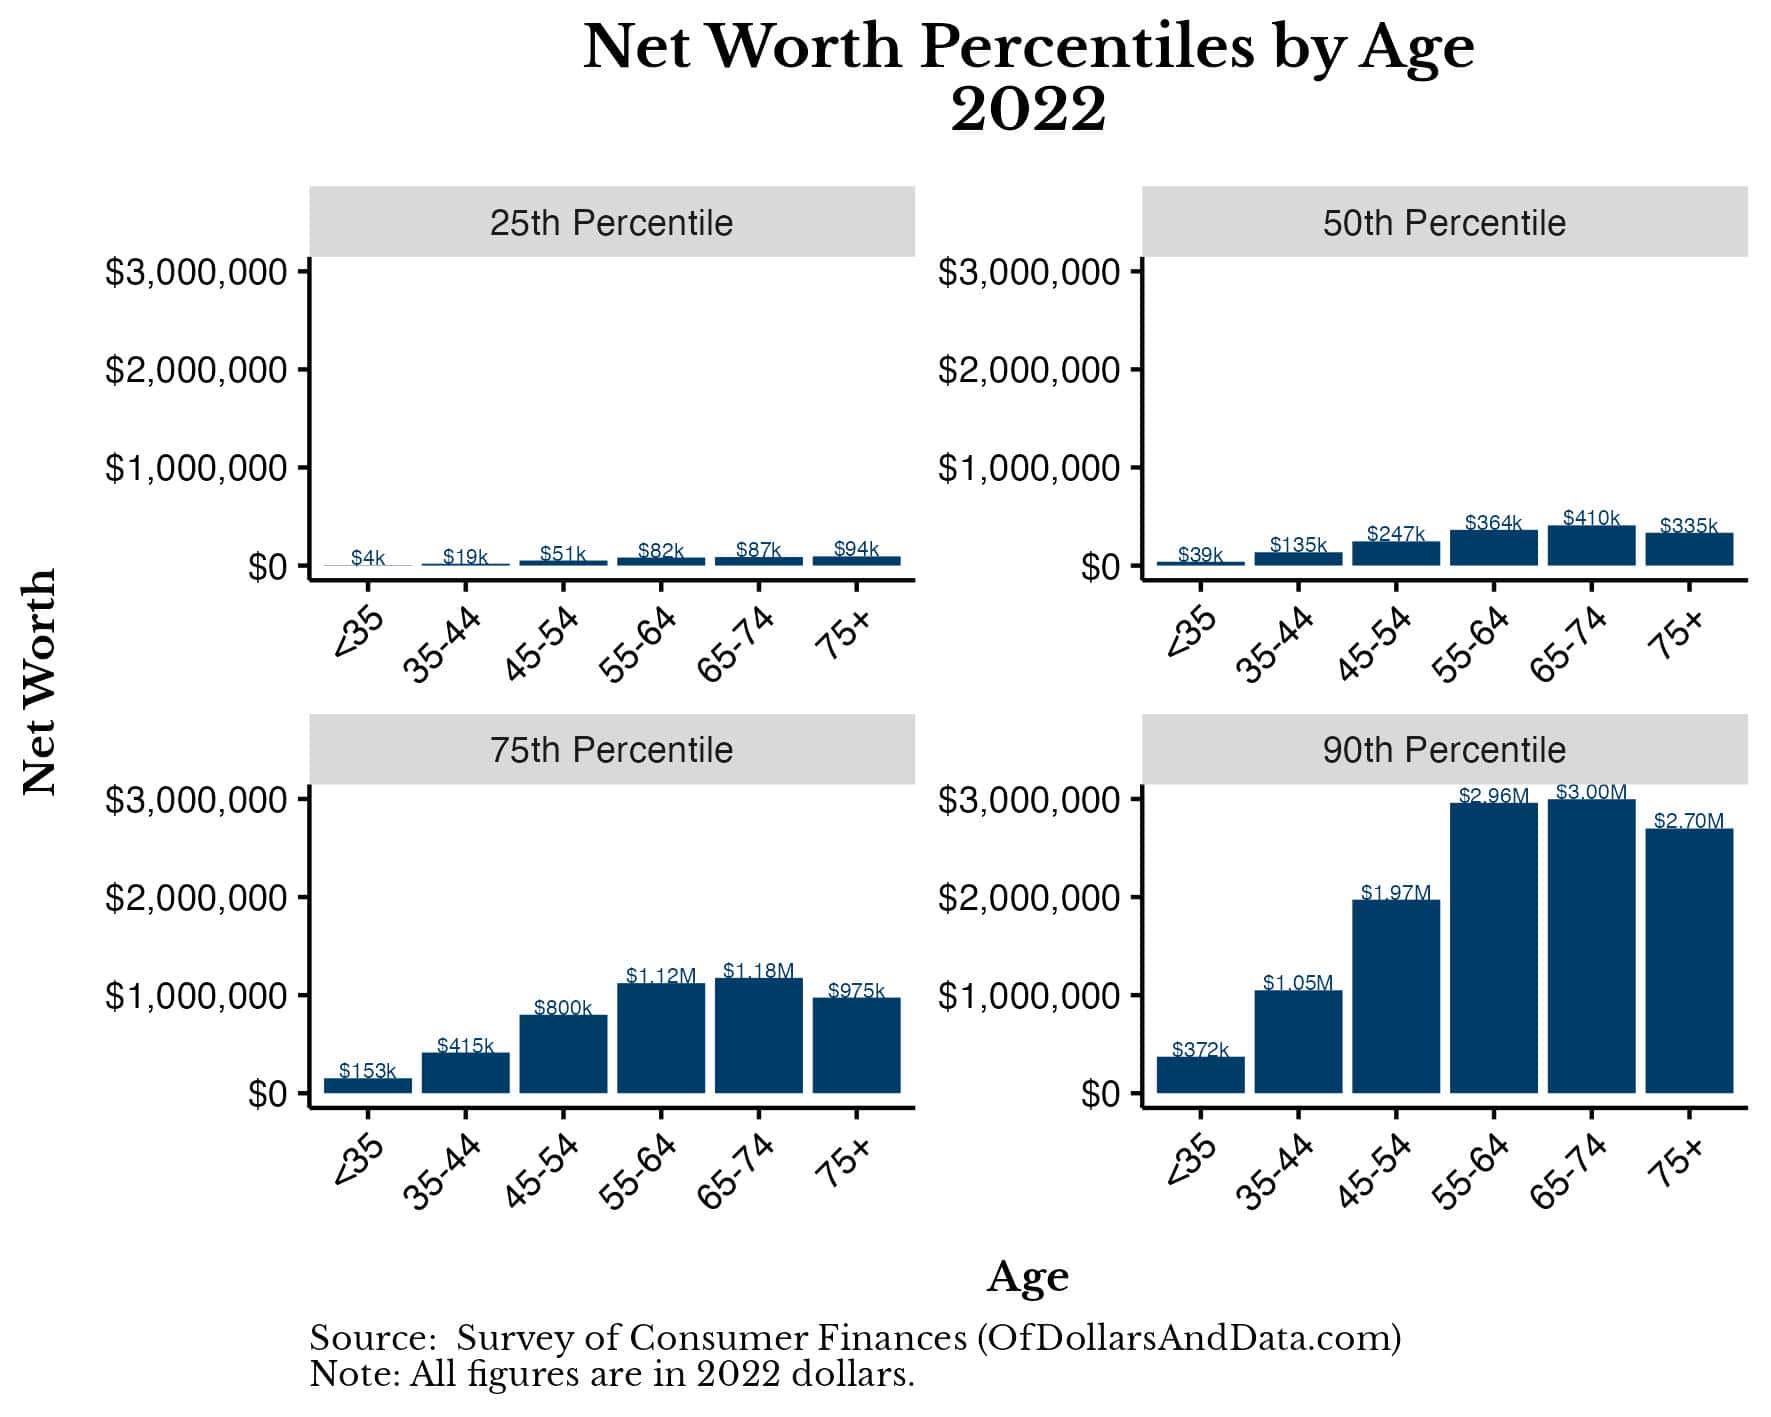 Chart showing multiple net worth percentiles by age in the Survey of Consumer Finances 2022 data from the Federal Reserve.